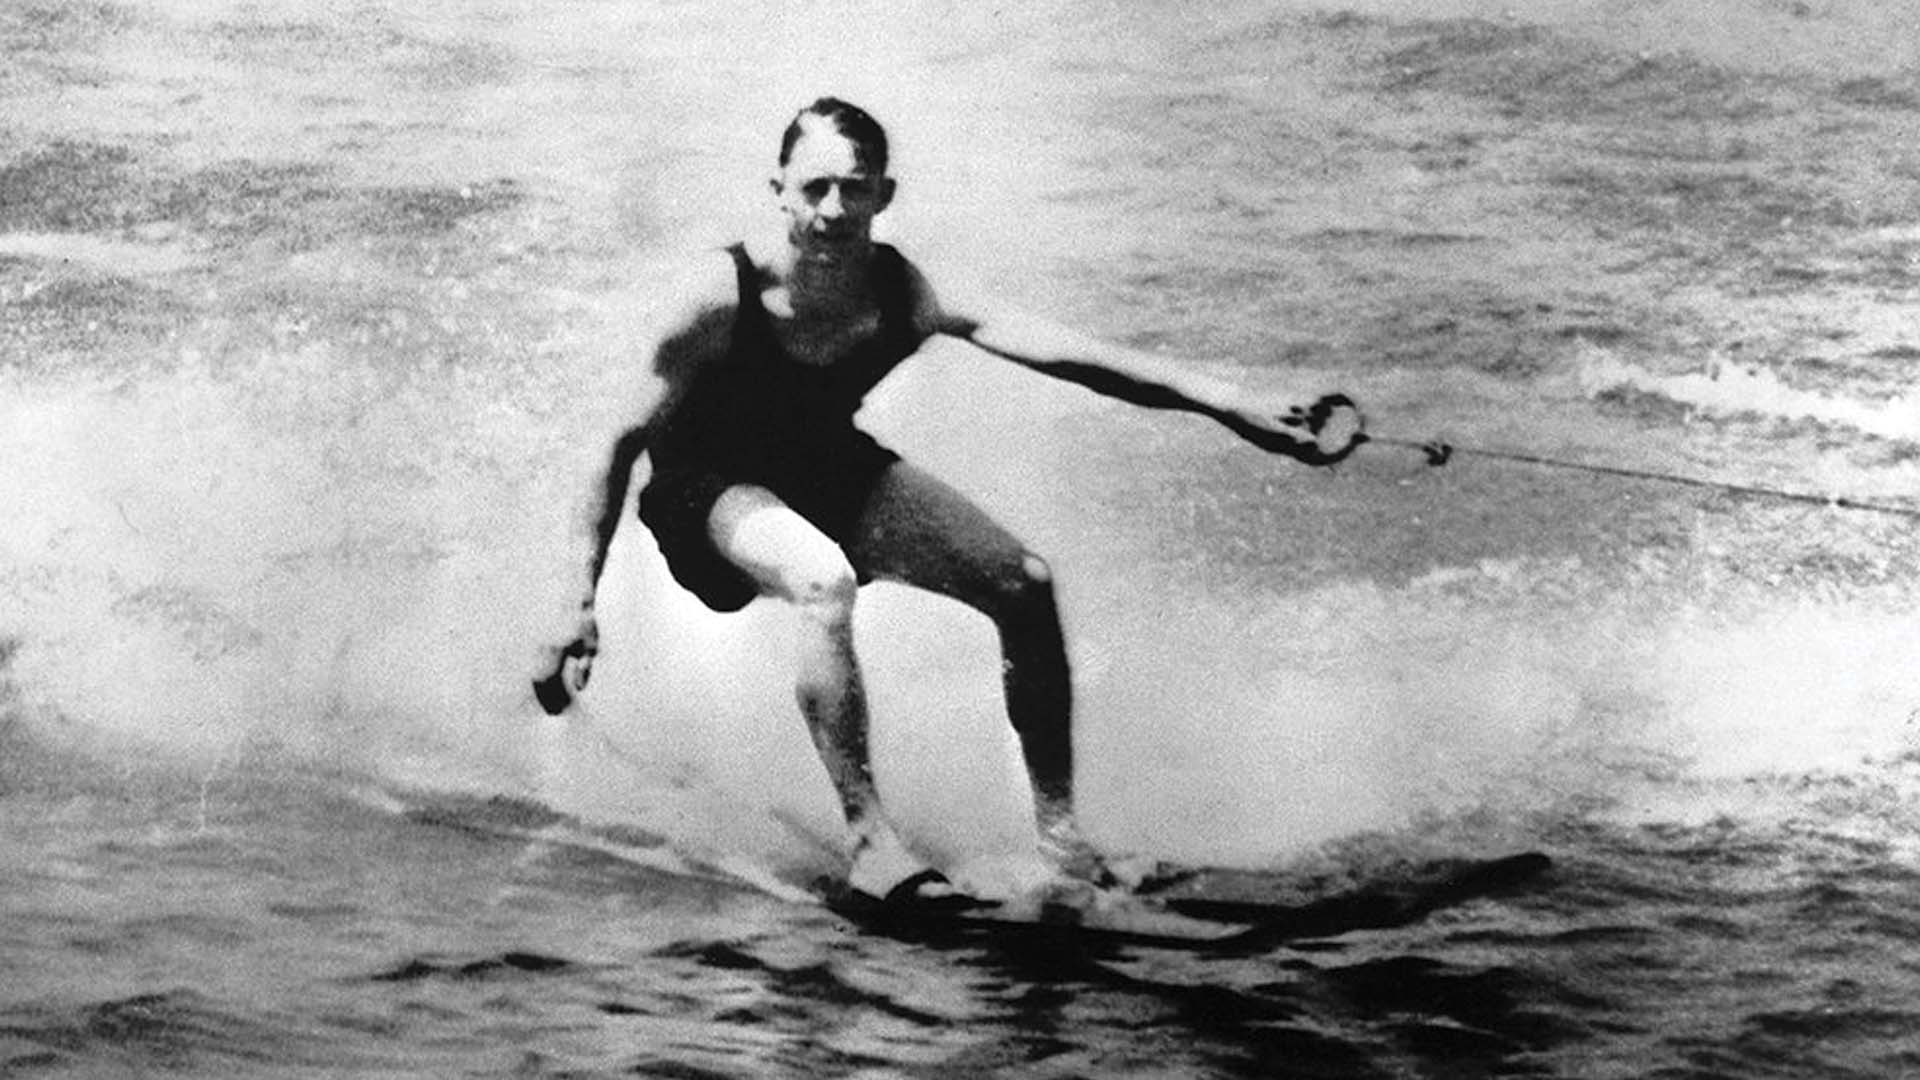 first waterskiing in 1922, invention turning 100 in 2022